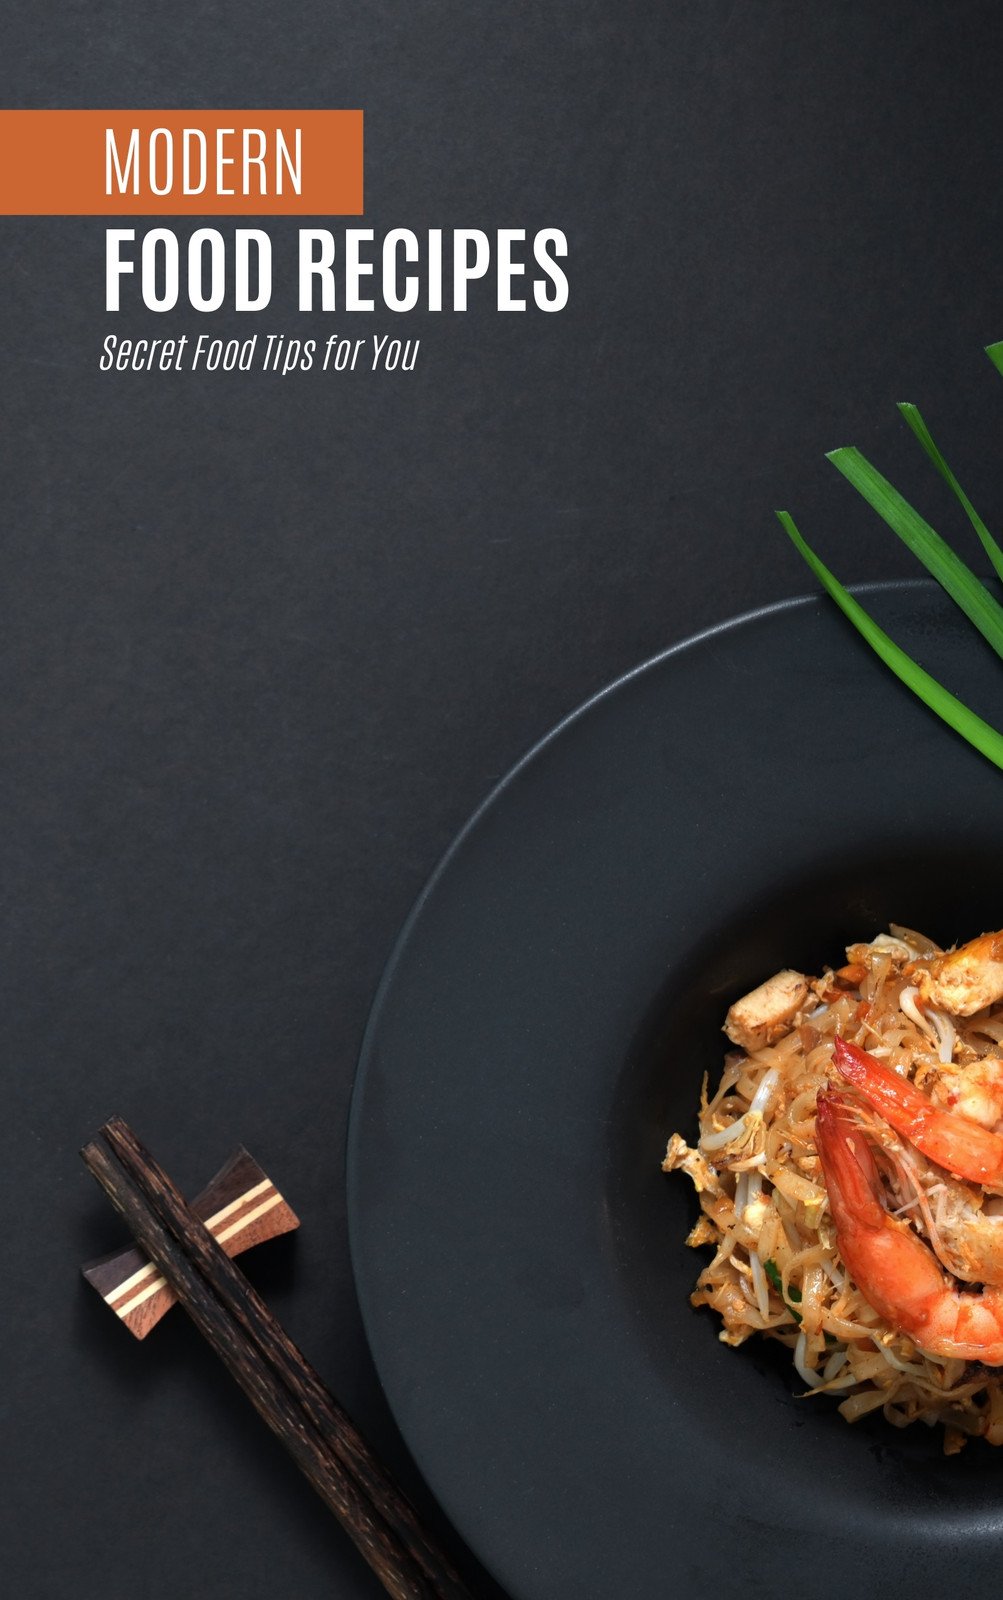 https://marketplace.canva.com/EAFJVmMyhCc/1/0/1003w/canva-black-and-orange-food-recipes-modern-and-simple-book-cover-hRDQqnoRAyQ.jpg